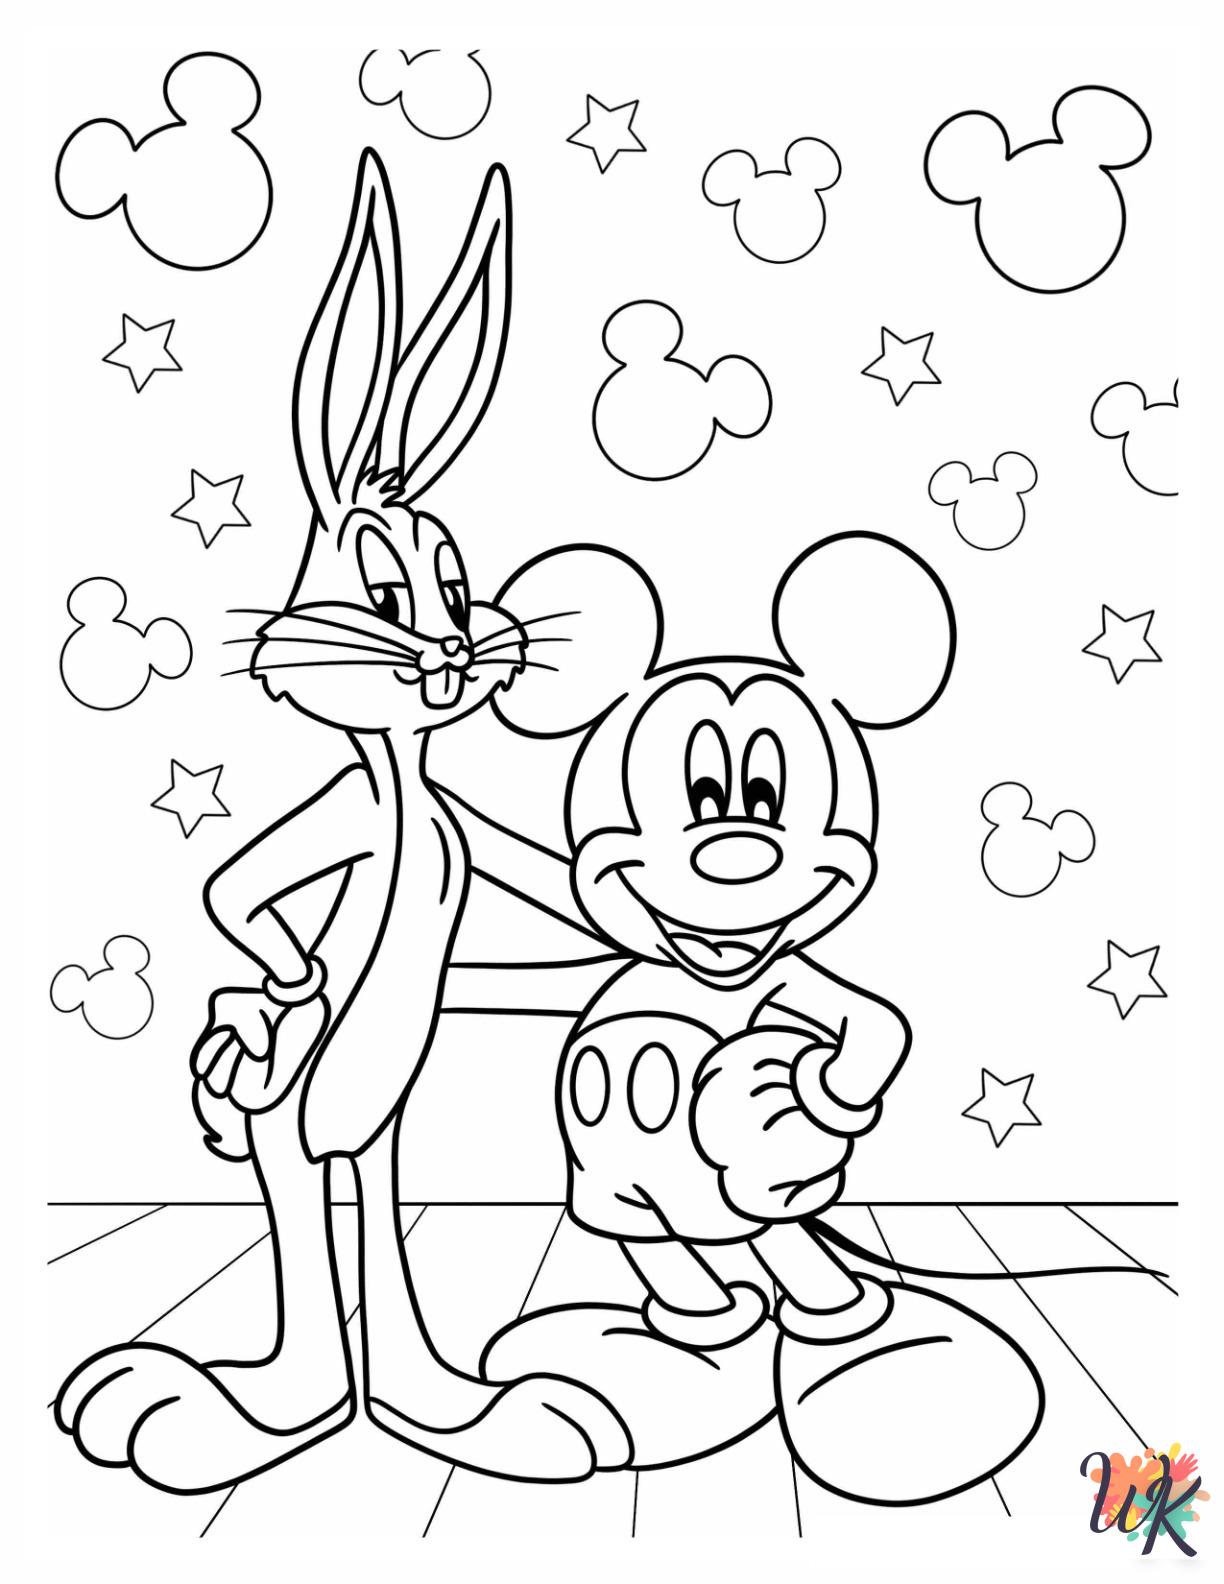 Bugs Bunny coloring pages printable